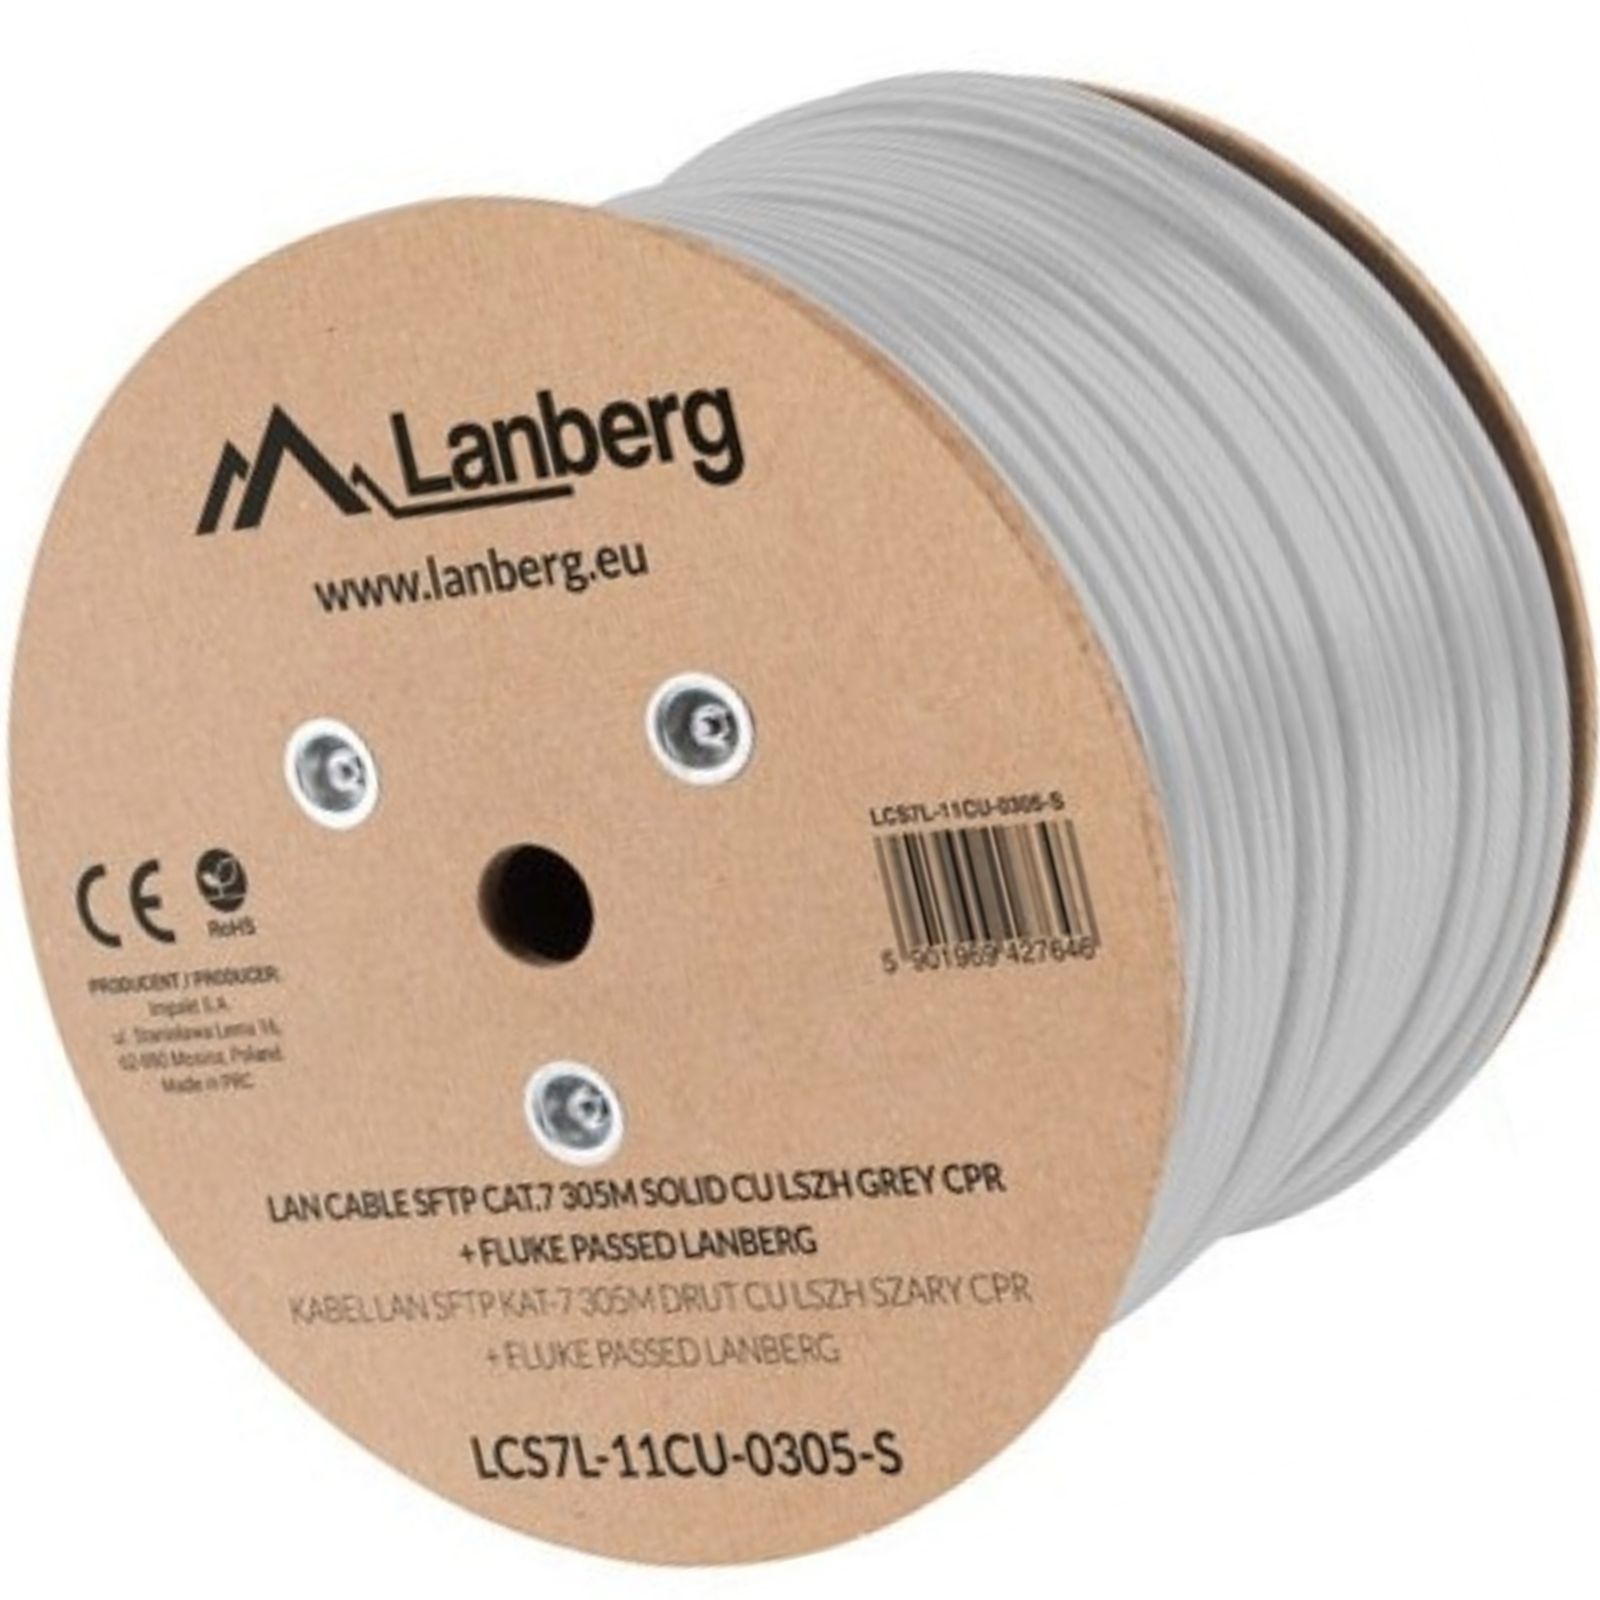 LANBERG CABLE UTP KAT.5E 305M WIRE CCA RED_2